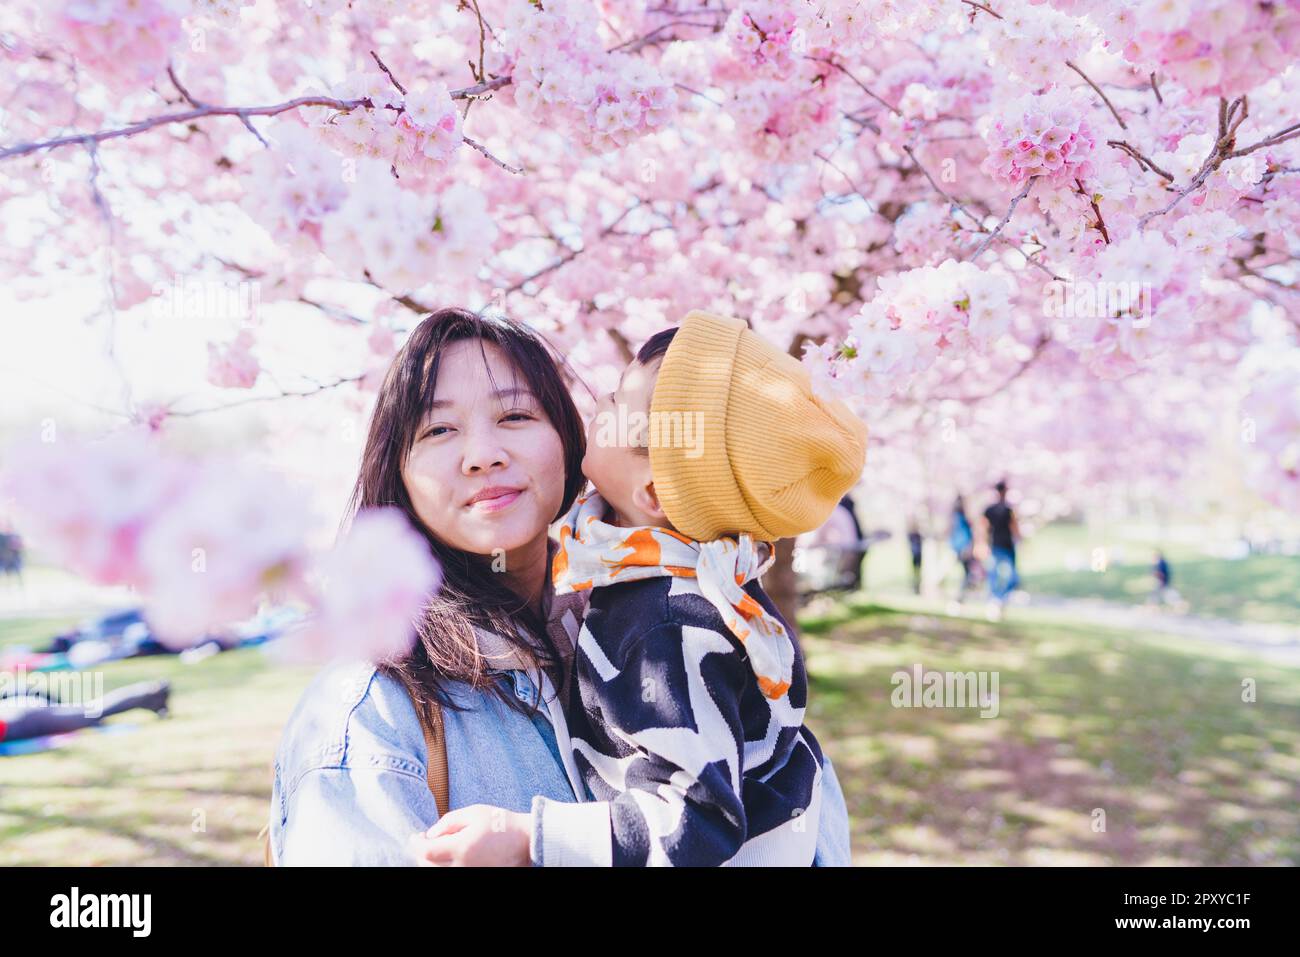 A mon with her kid standing under Sakura trees in the Cherry blossom season. Stock Photo